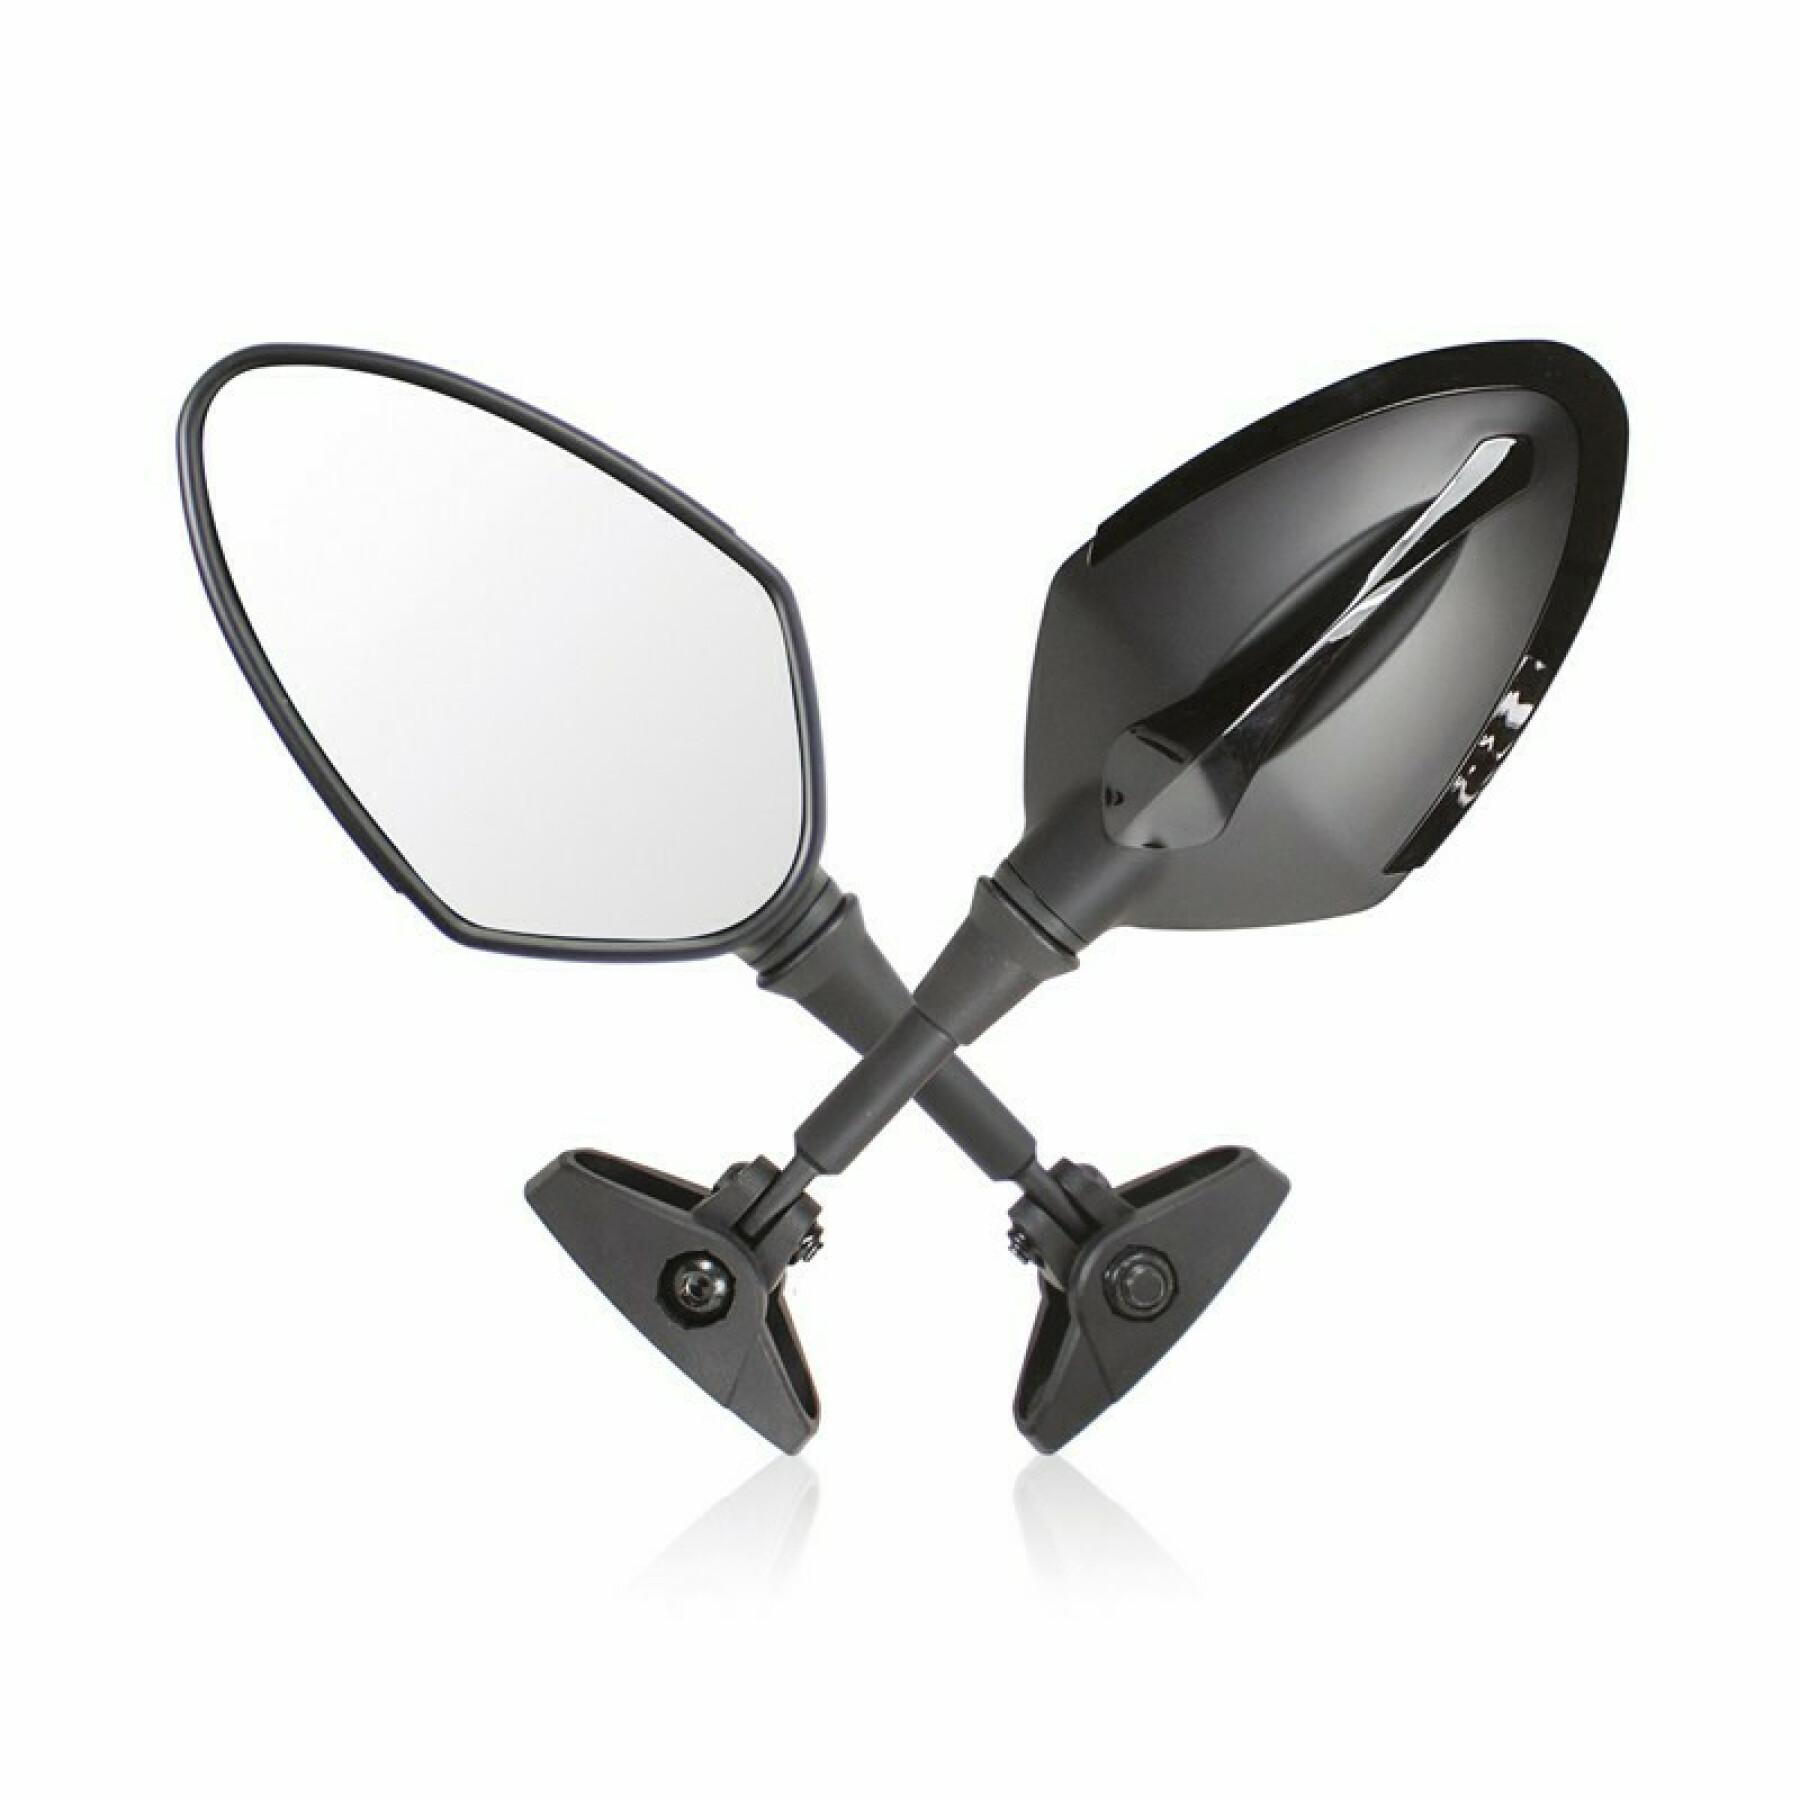 The pair of fairing approved motorcycle mirrors Chaft story